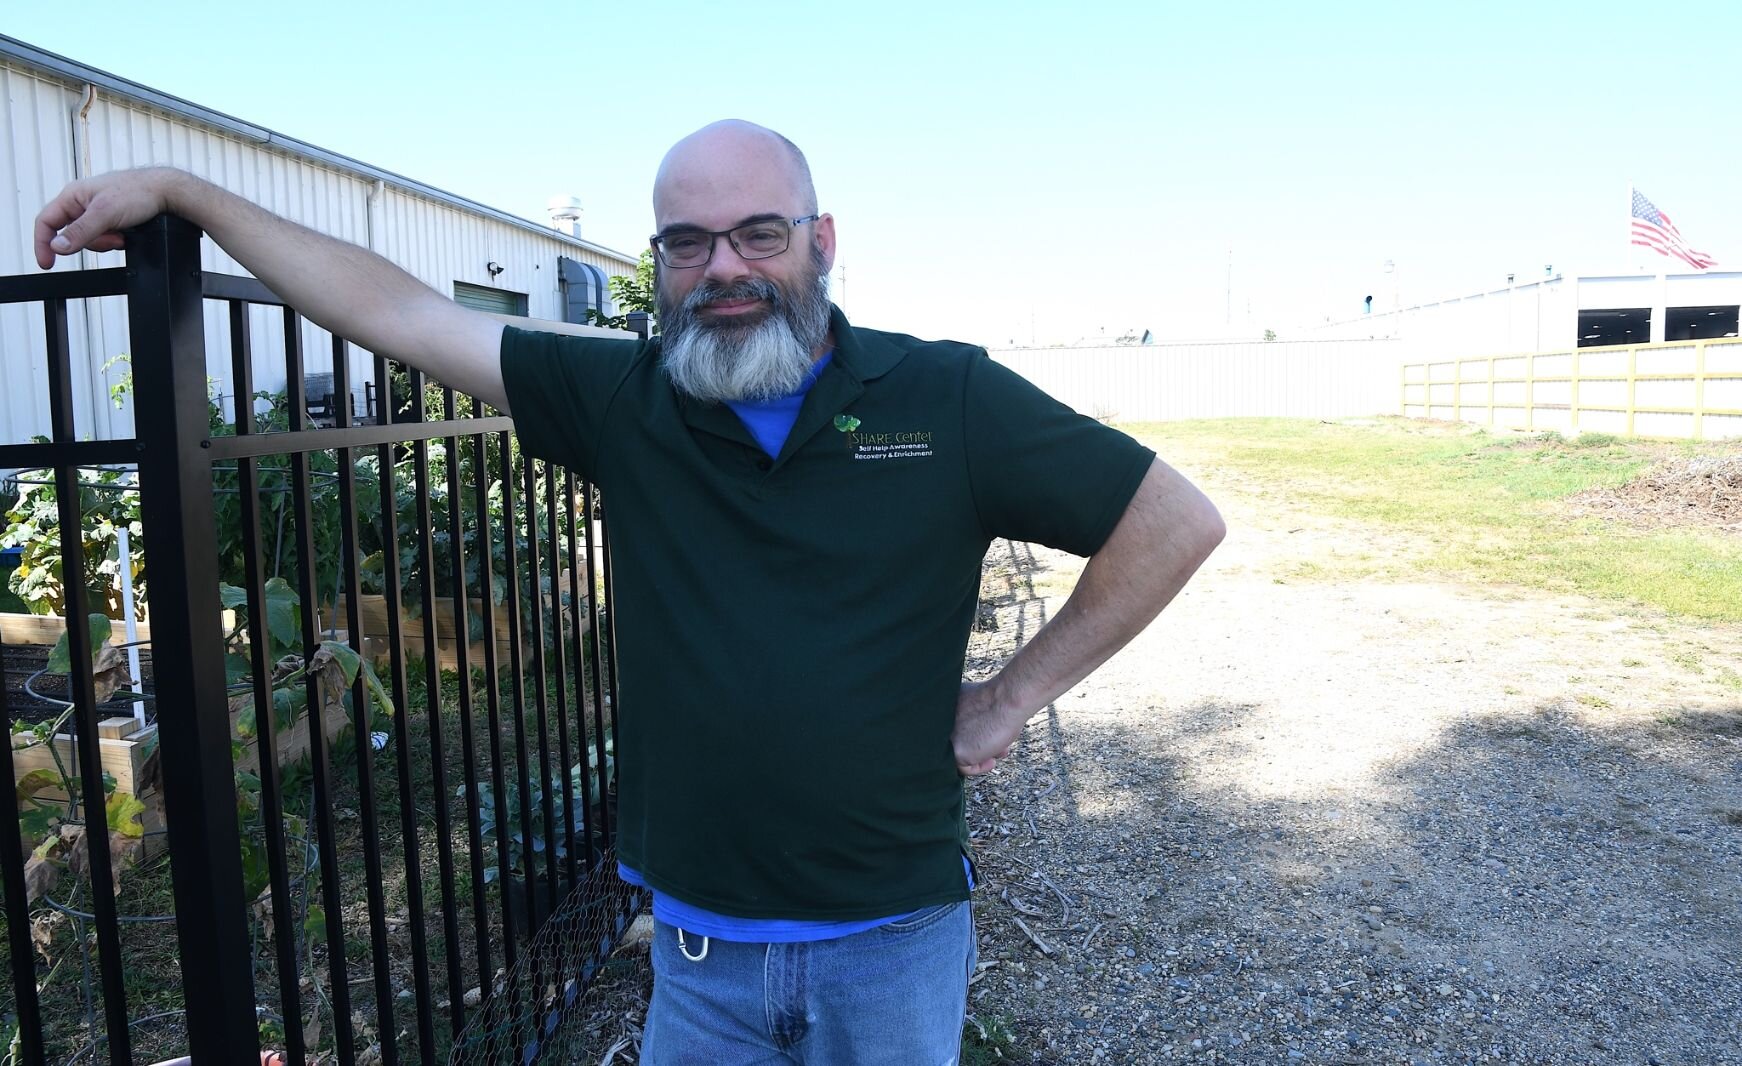 Robert Elchert, executive director of the SHARE Center, stands by a space he hopes will become a developed open recreational space, instead of a vacant field.